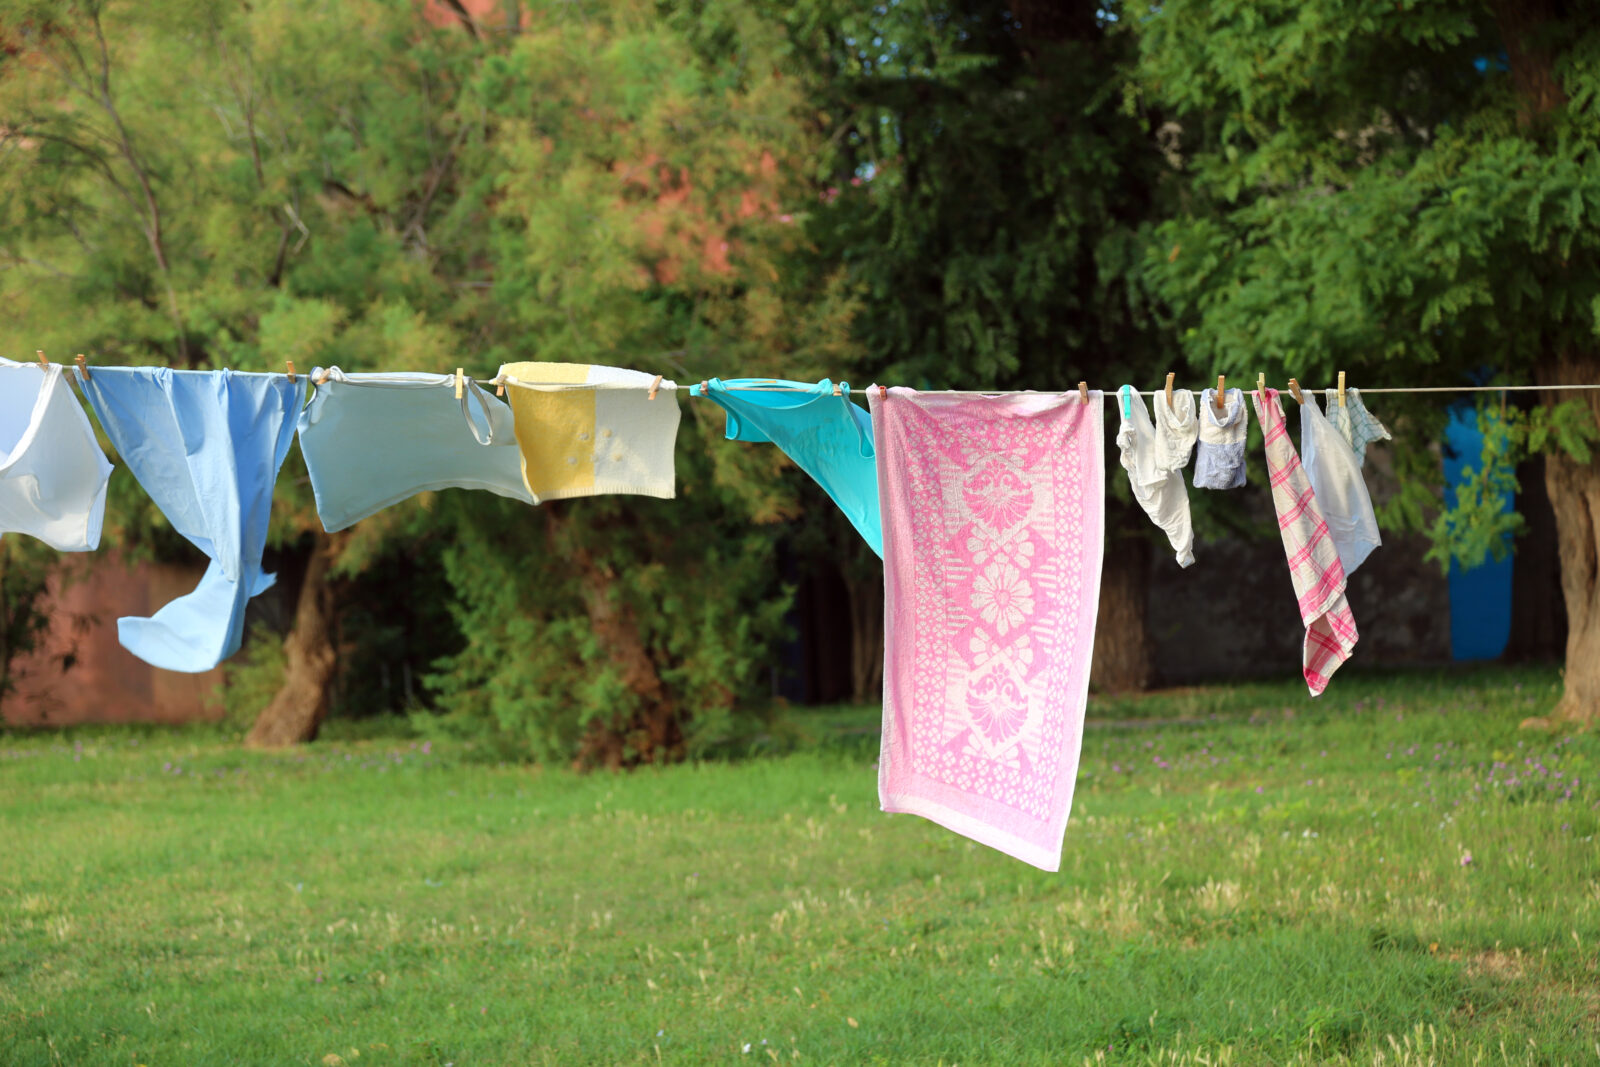 laundry drying outside